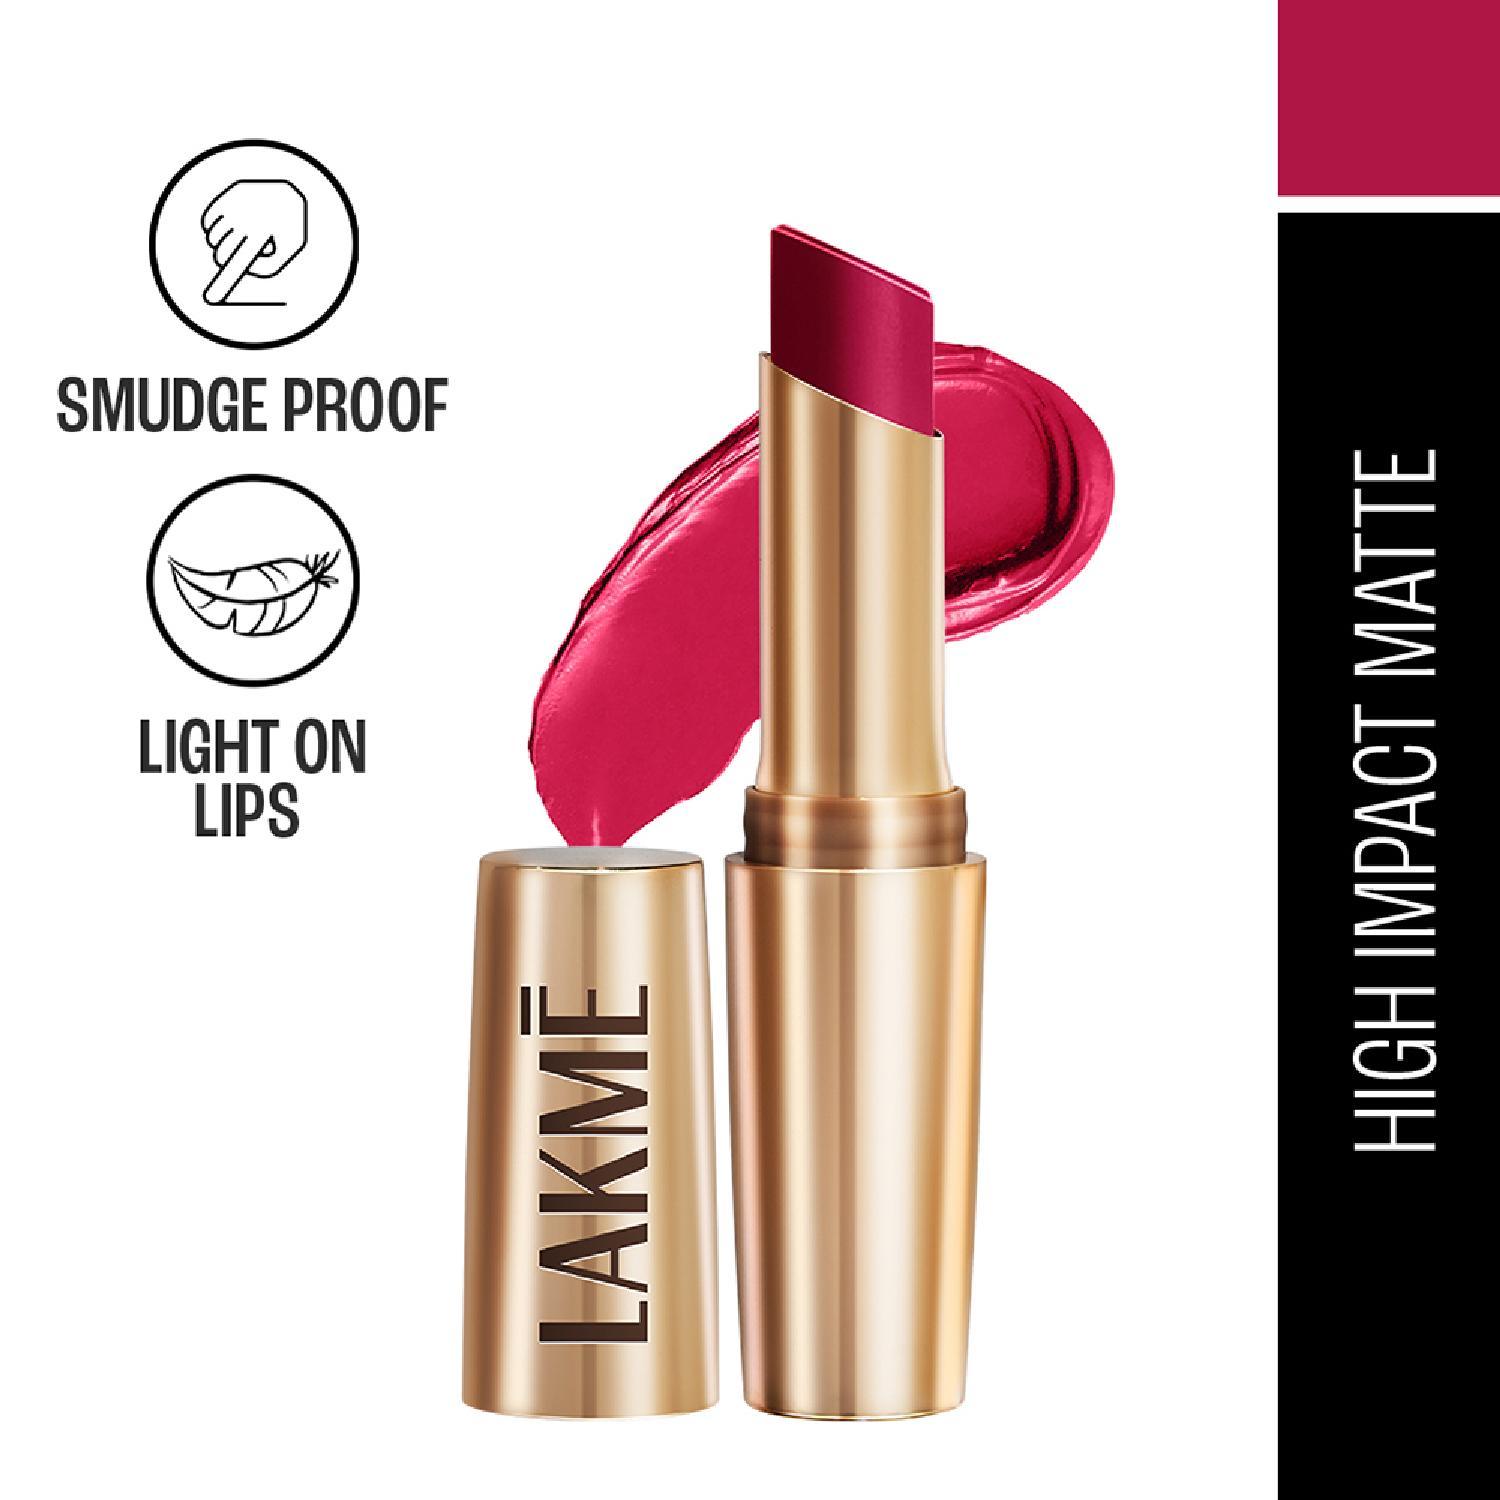 Lakme | Lakme 9 to 5 Powerplay Priming Matte Lipstick, Lasts 16hrs, Rose Day,3.6g